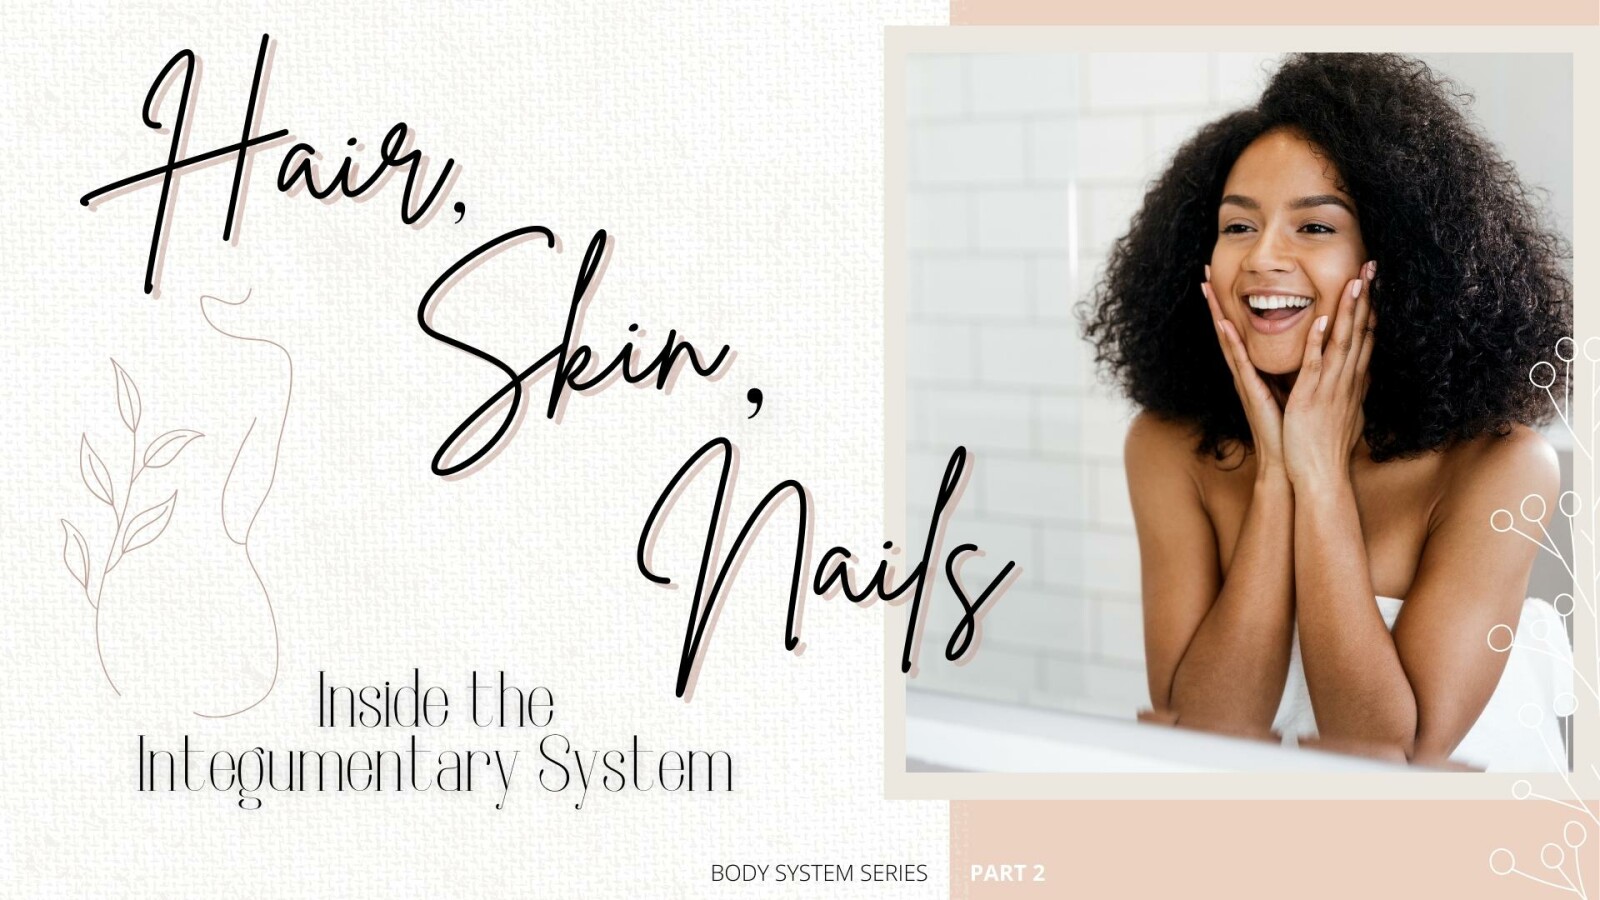 Hair, Skin, & Nails - The Integumentary System